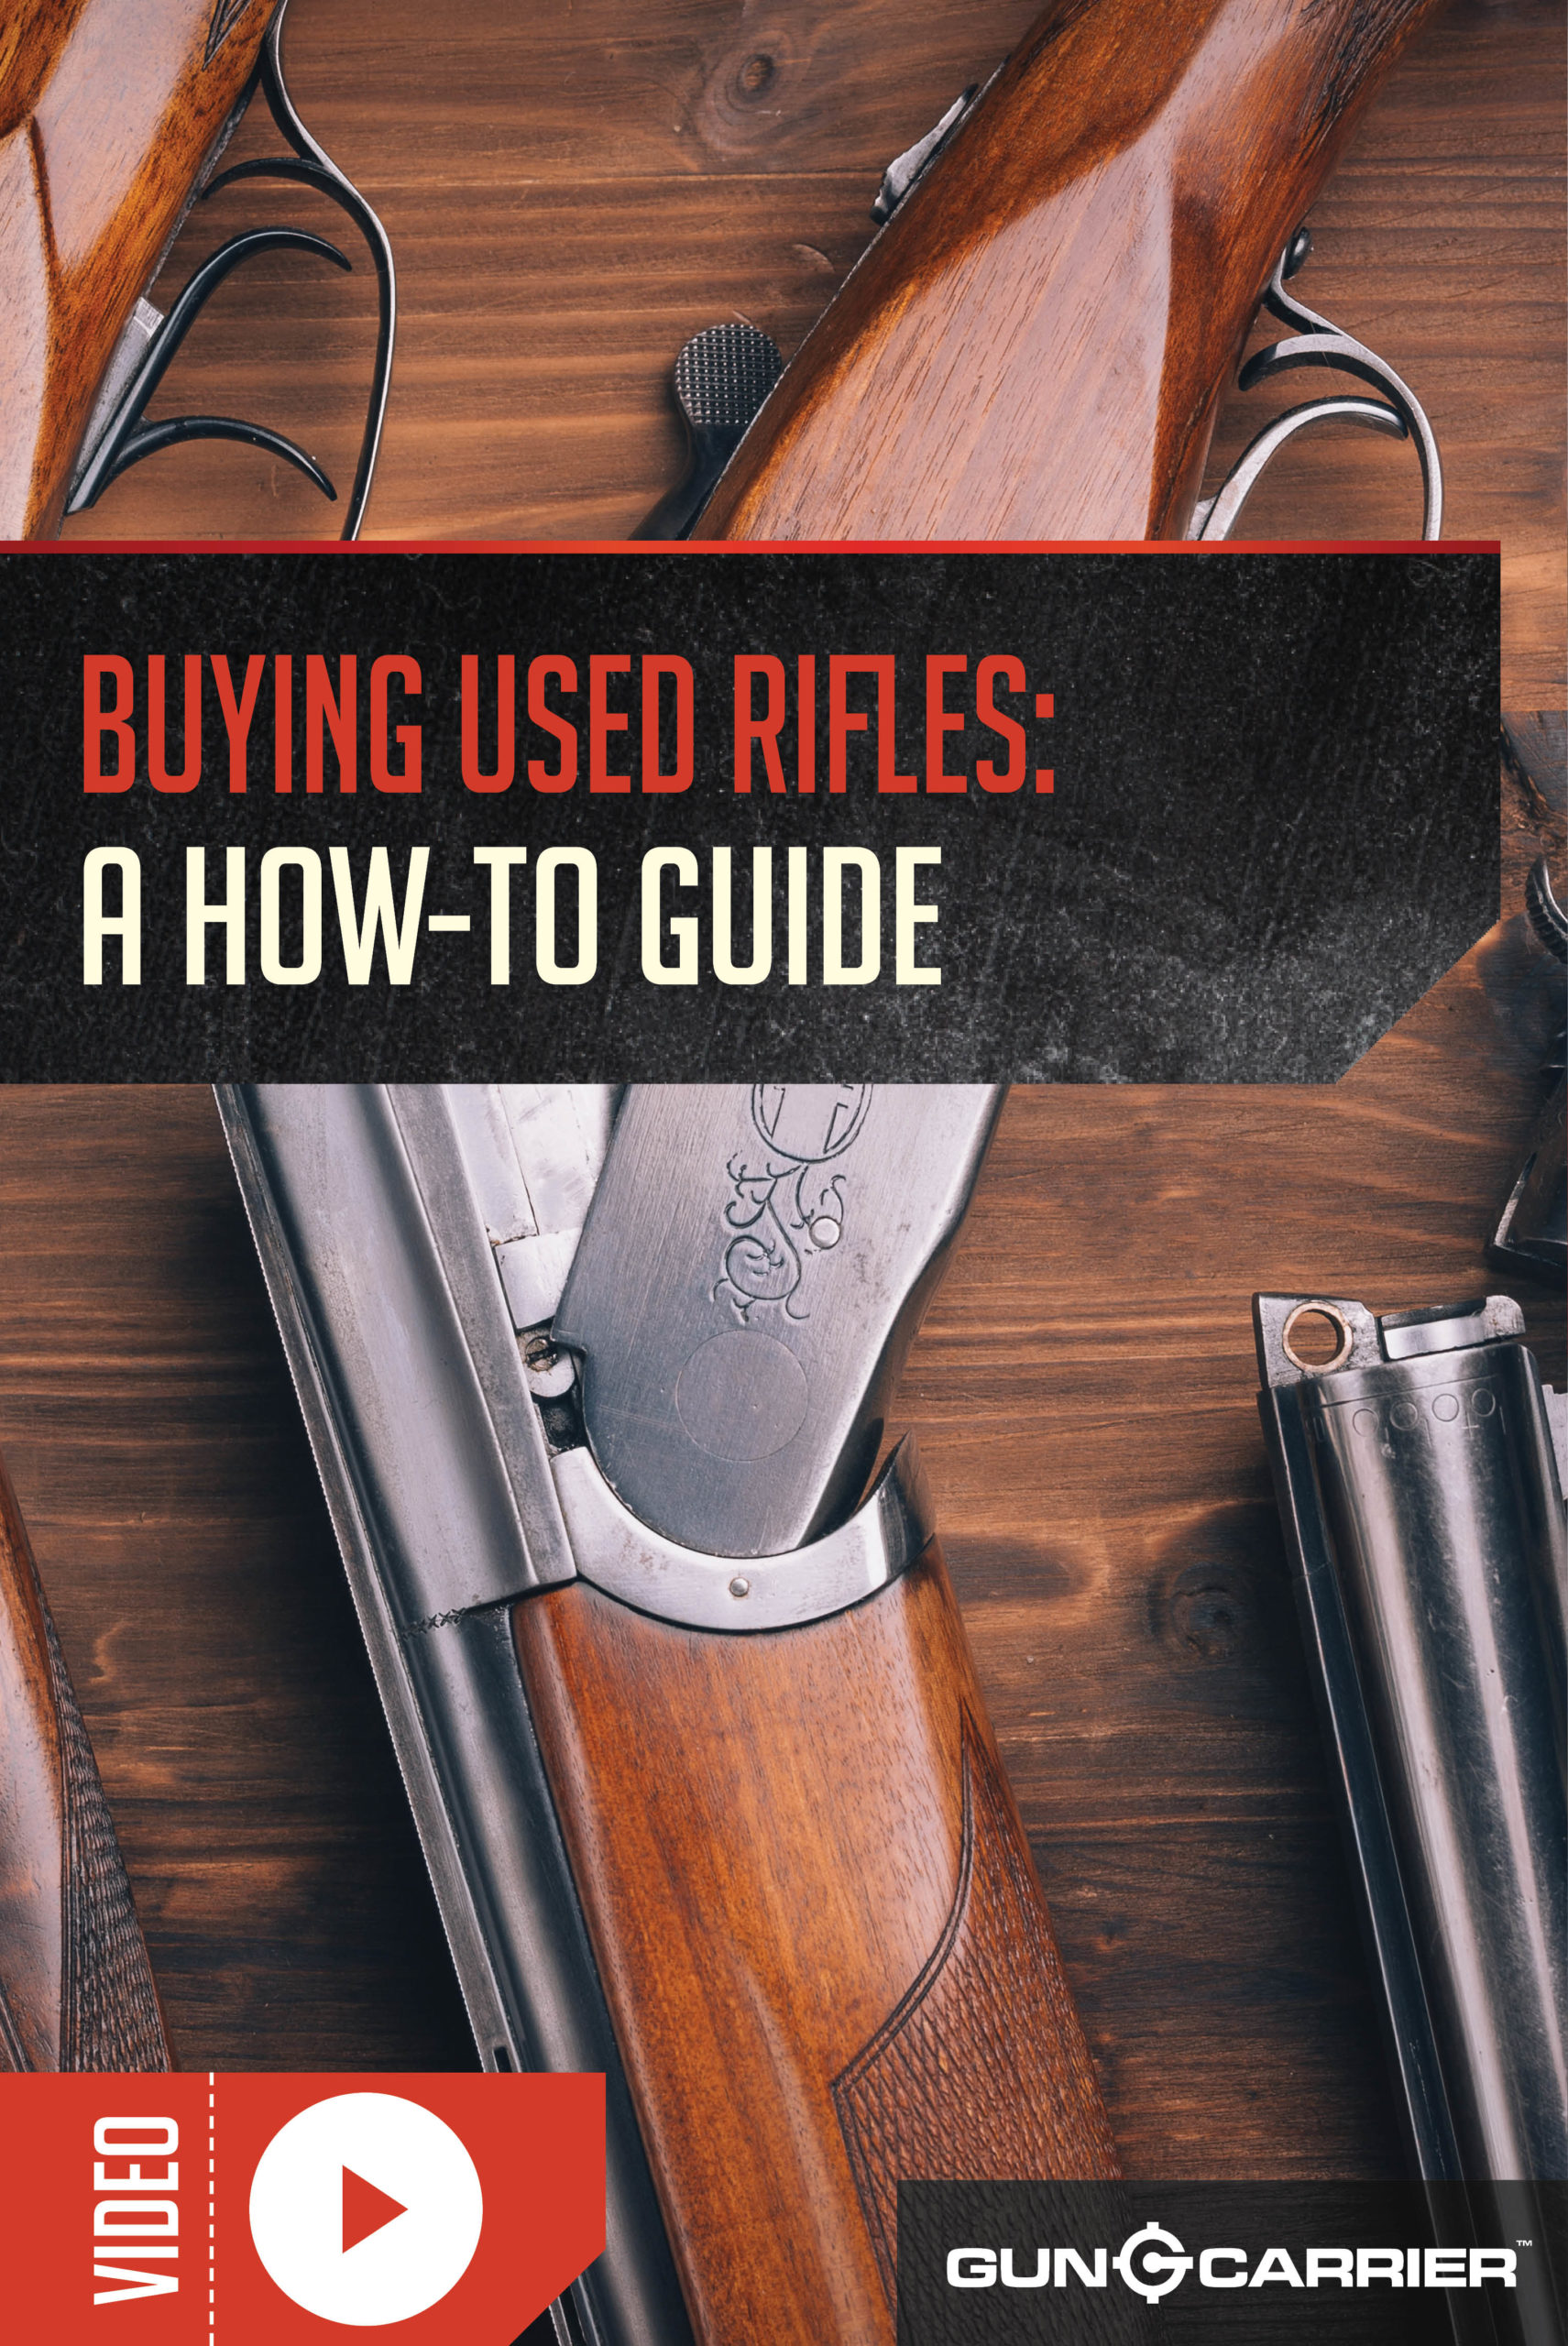 Buying a Used Rifle: What to Look For by Gun Carrier at https://guncarrier.com/buying-used-rifle-look/